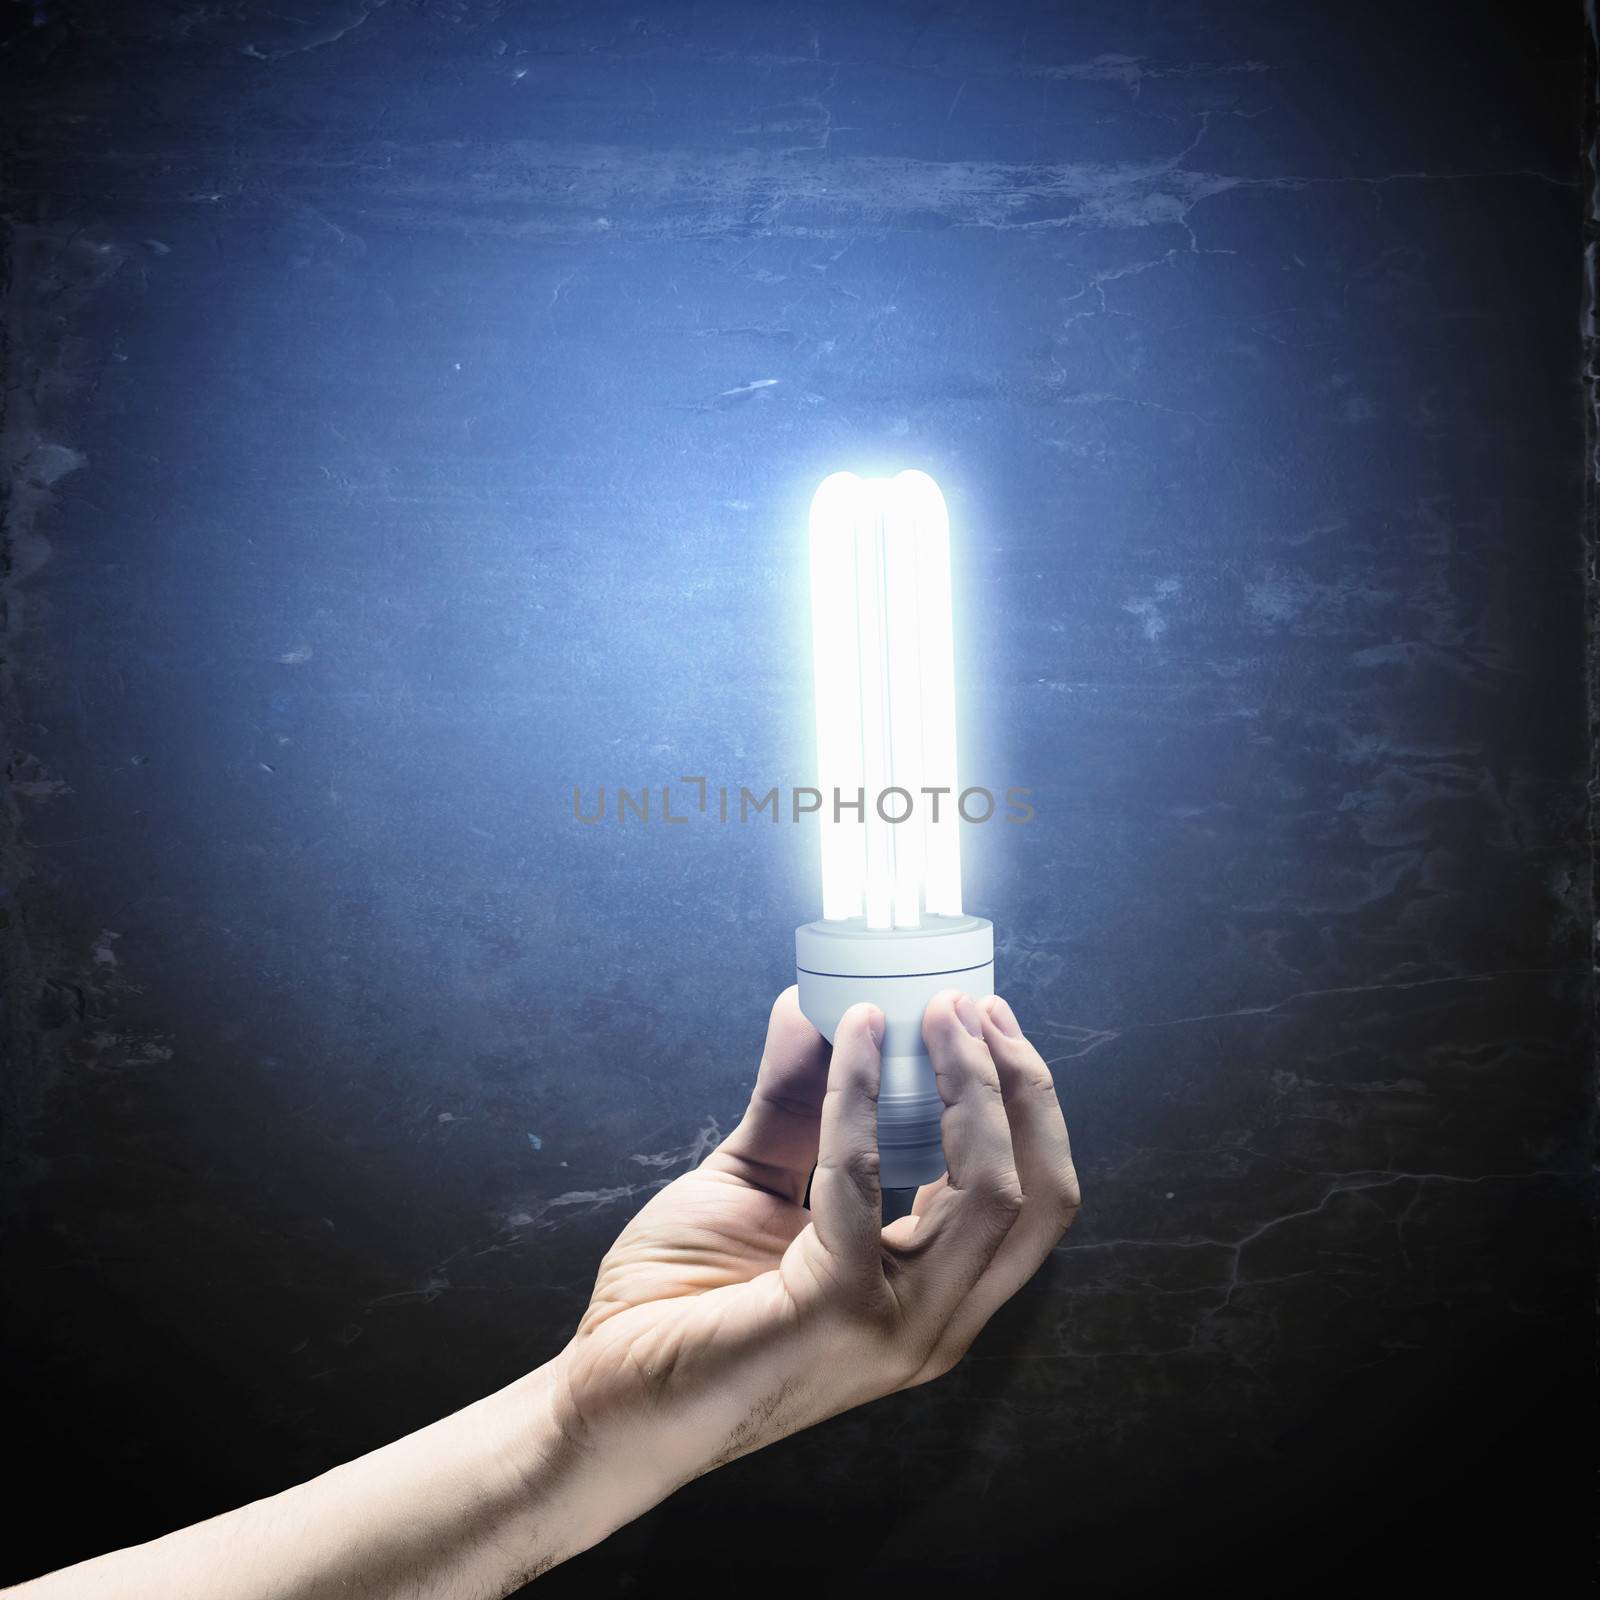 Close up image of human hand holding electrical bulb in darkness